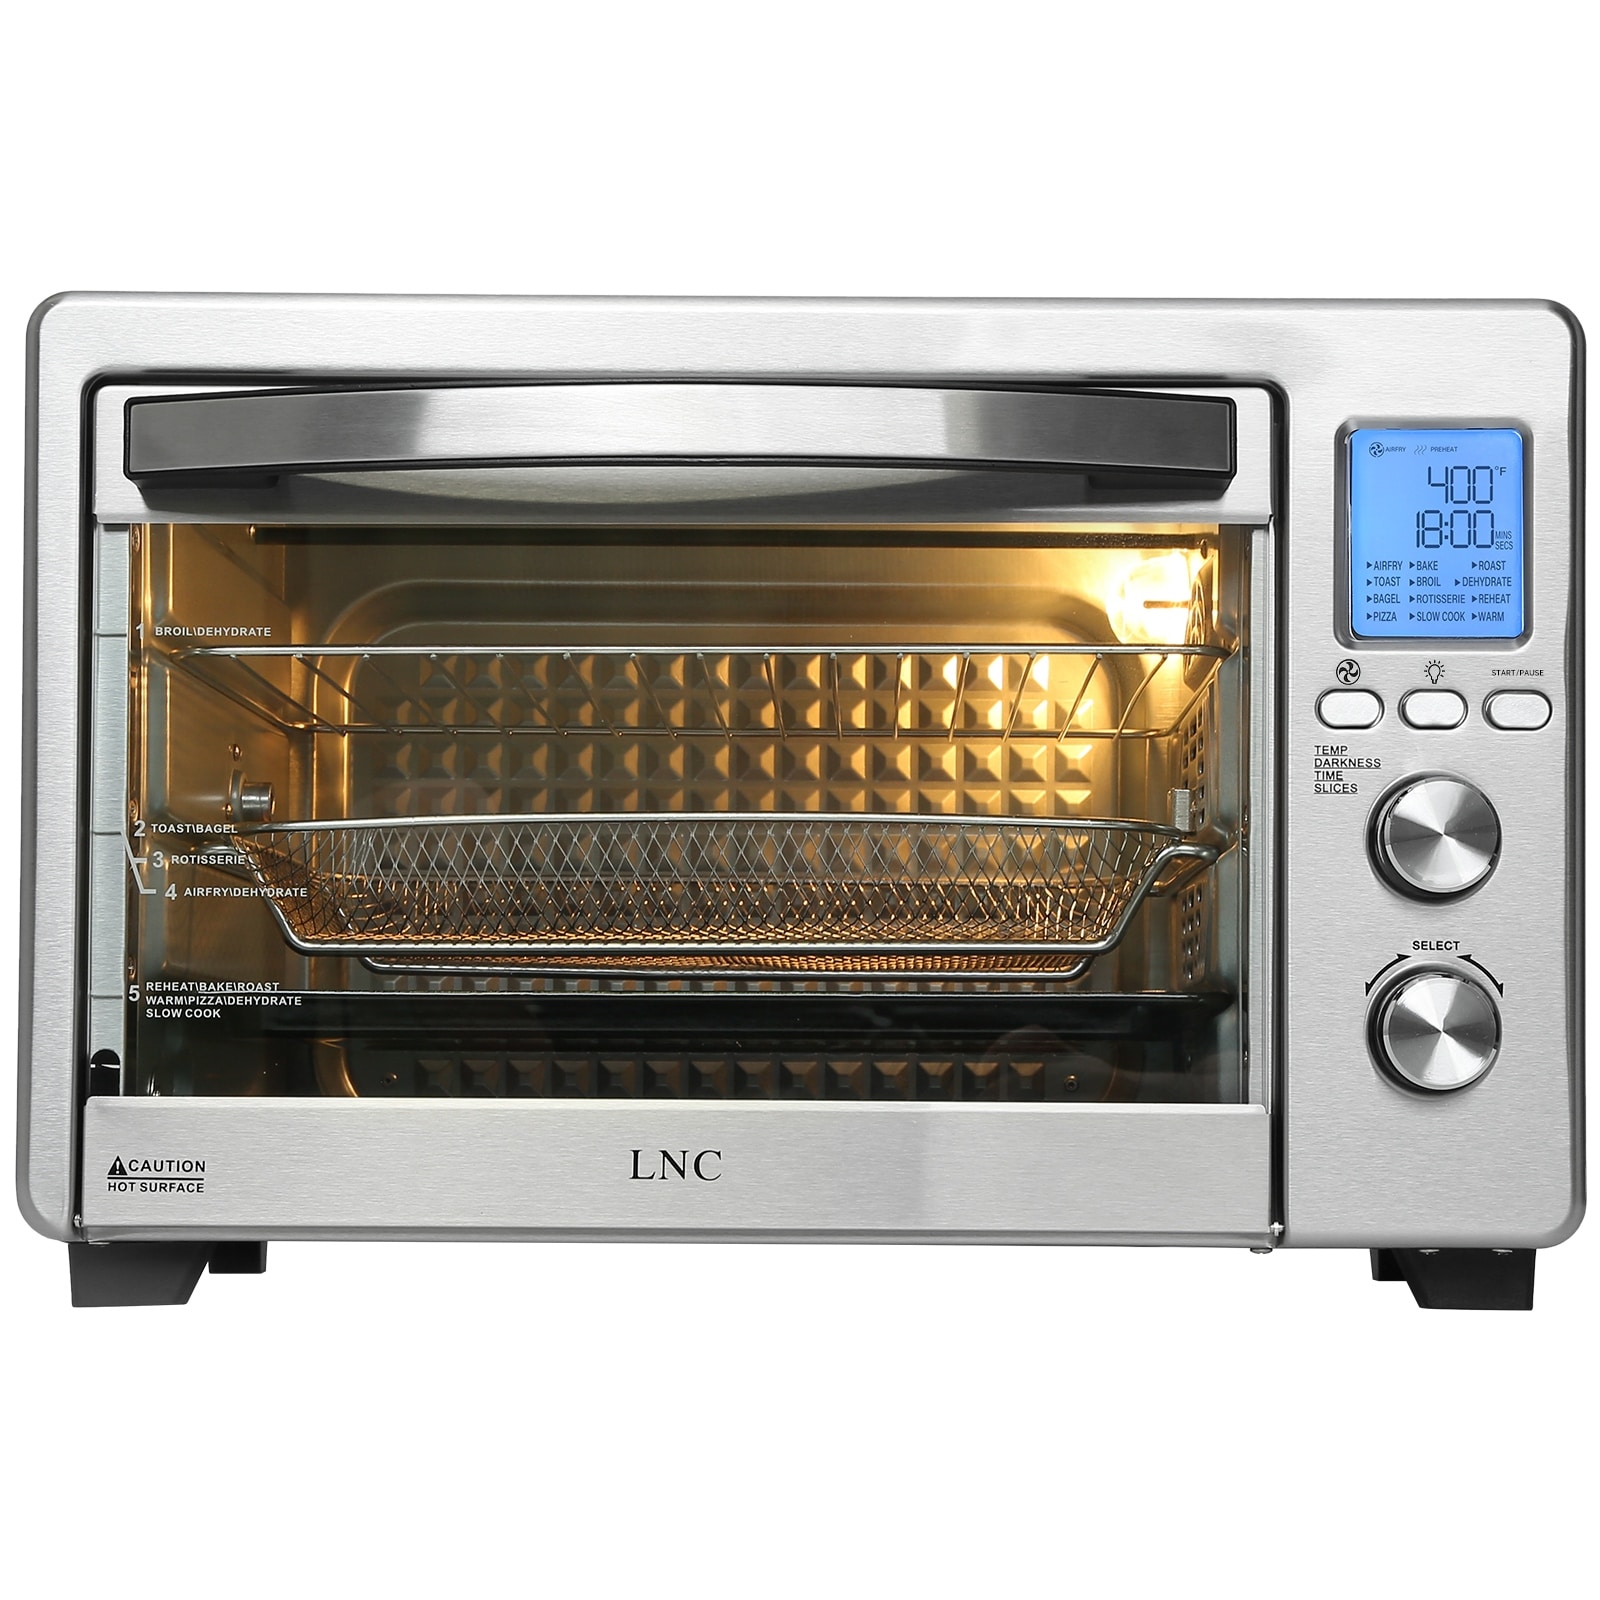 Countertop Oven with Convection and Rotisserie - 31100D